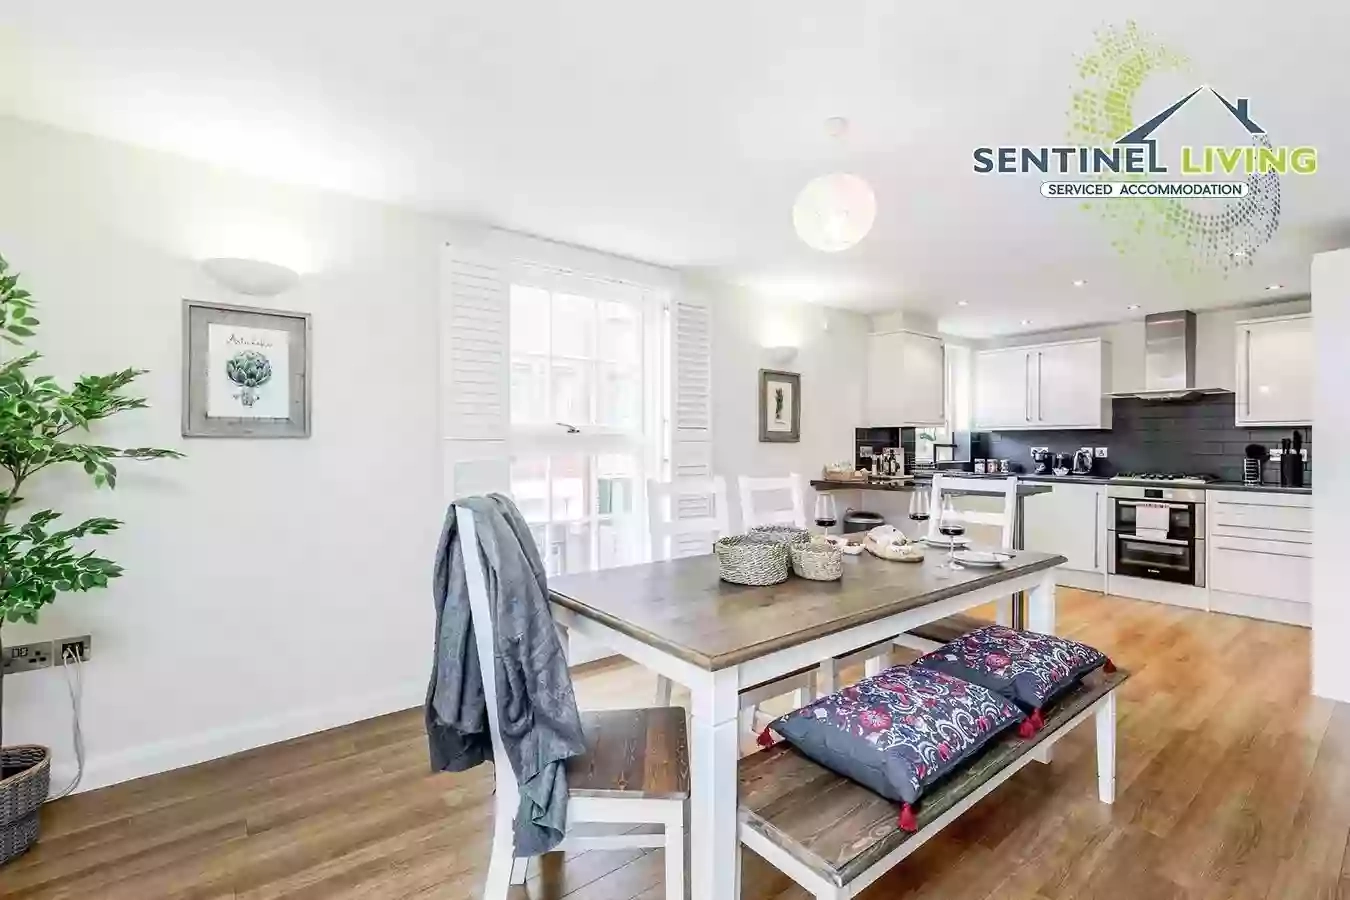 Sentinel Living Serviced Accommodation and Apartments Windsor